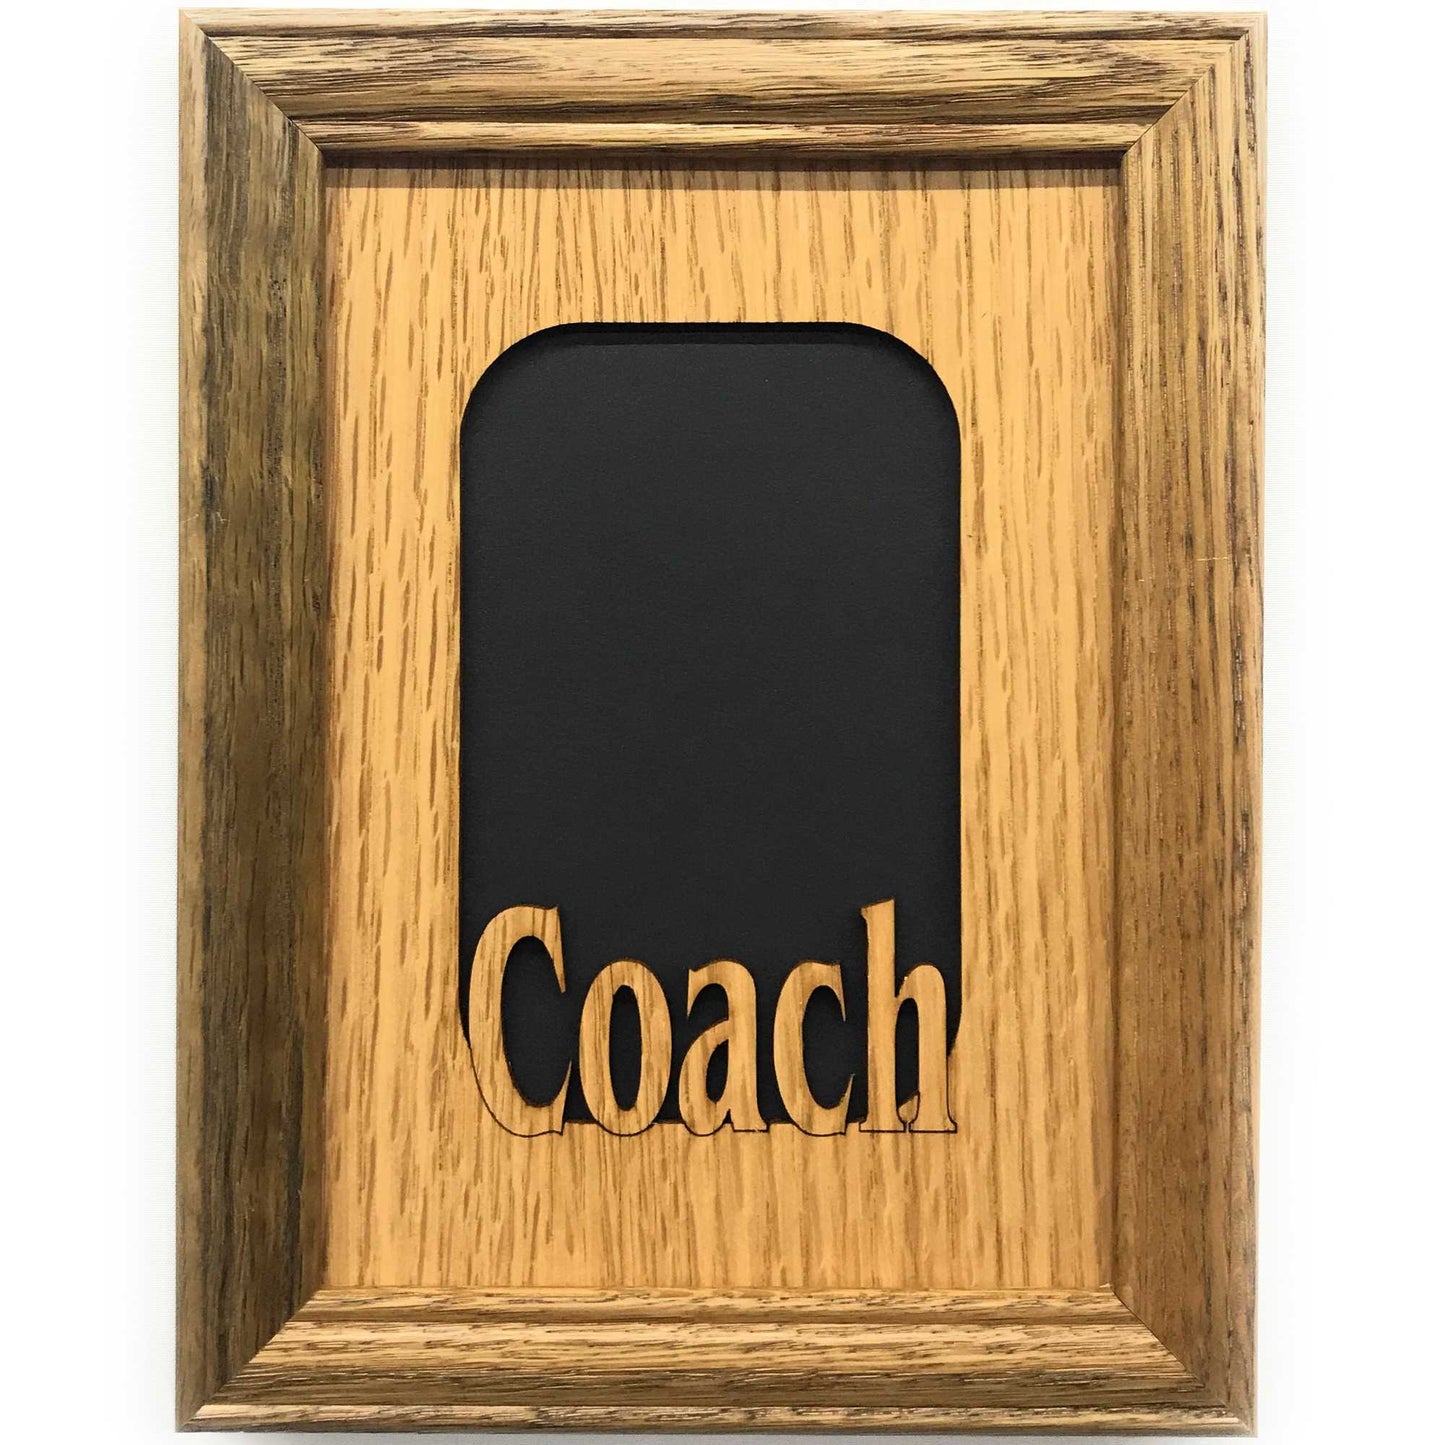 Coach Picture Frame - 5x7 Frame Holds 3x5 Photo - Coach Picture Frame - 5x7 Frame Holds 3x5 Photo - Legacy Images - Picture Frame - Legacy Images - Picture Frame